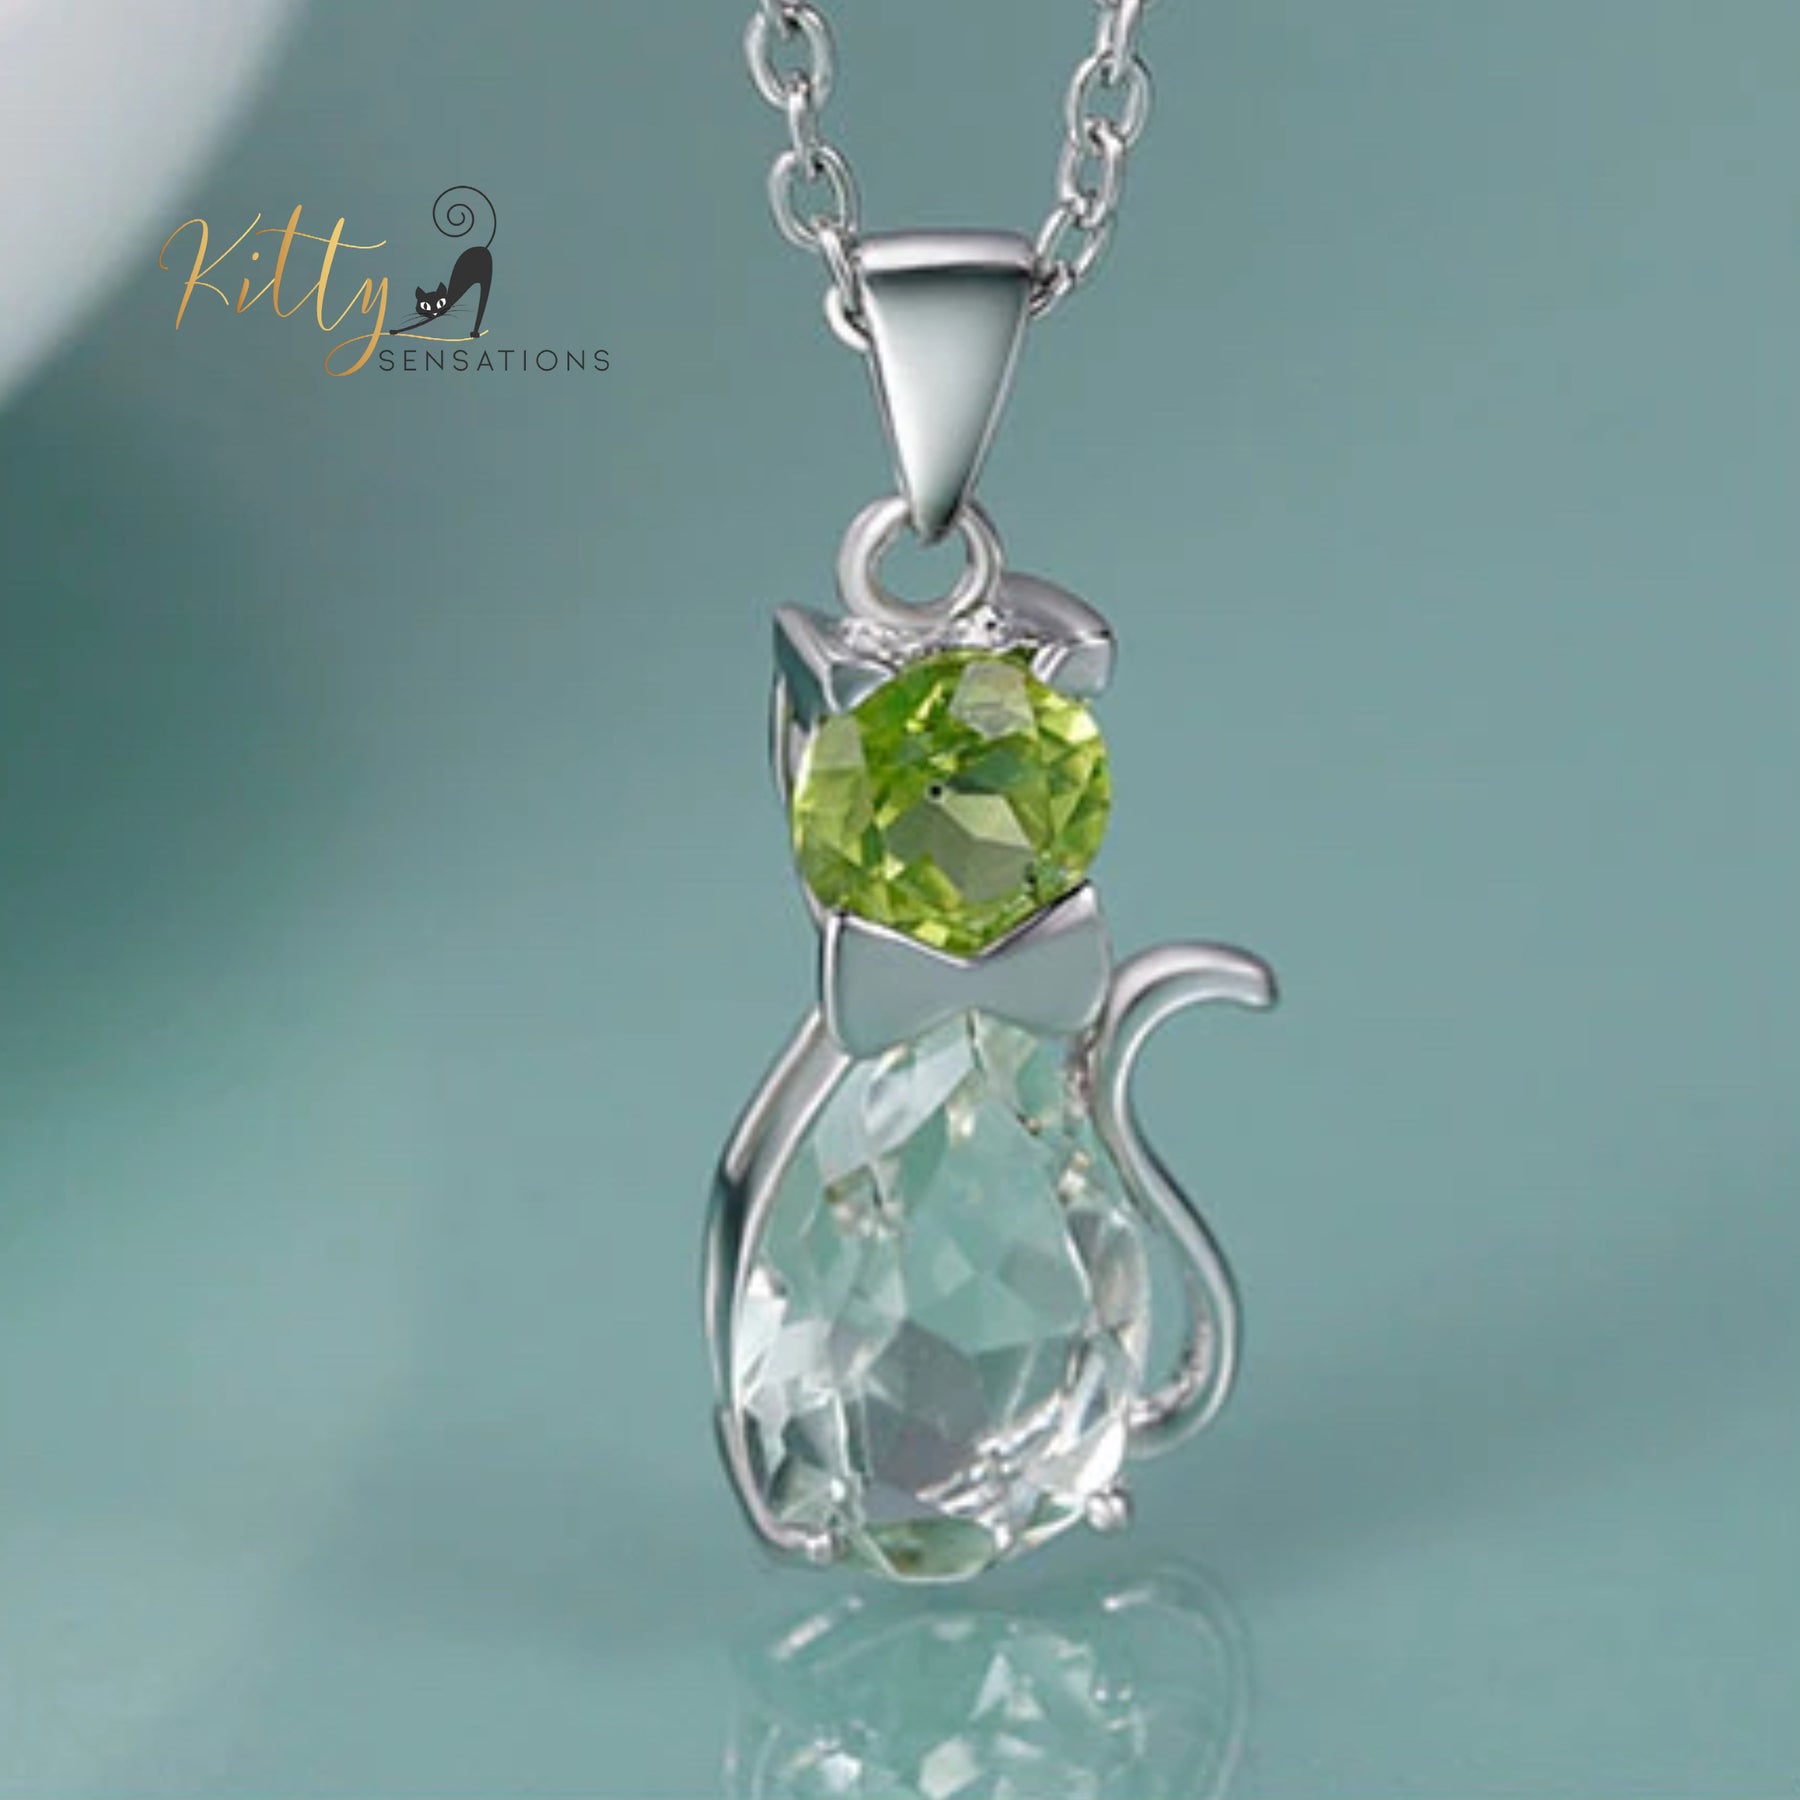 www.KittySensations.com: Natural Green Amethyst Cat Necklace in Solid 925 Sterling Silver ($194): https://www.kittysensations.com/products/natural-green-amethyst-cat-necklace-in-solid-925-sterling-silver